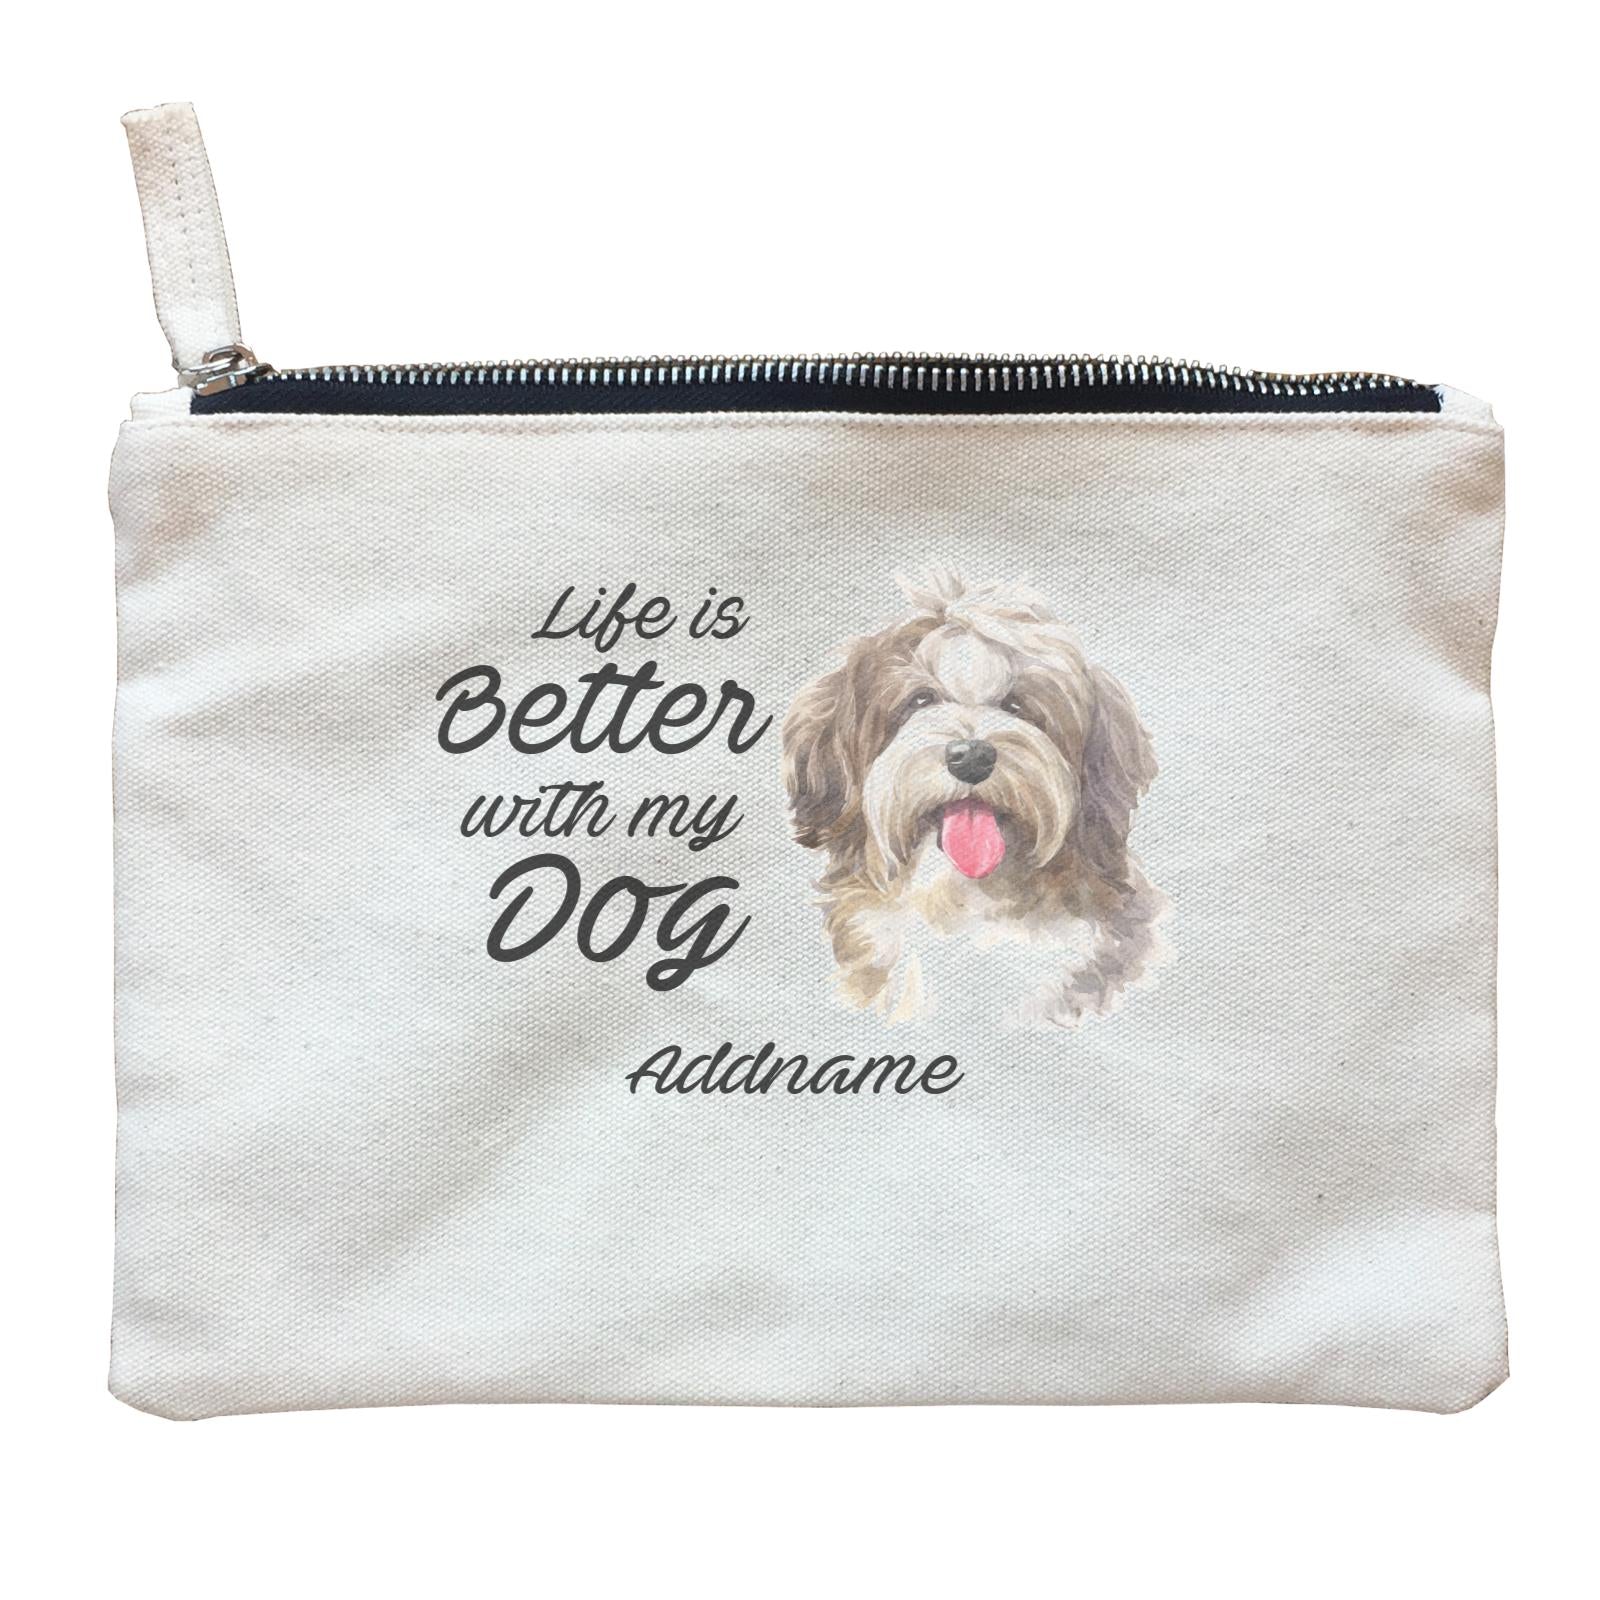 Watercolor Life is Better With My Dog Shaggy Havanese Addname Zipper Pouch